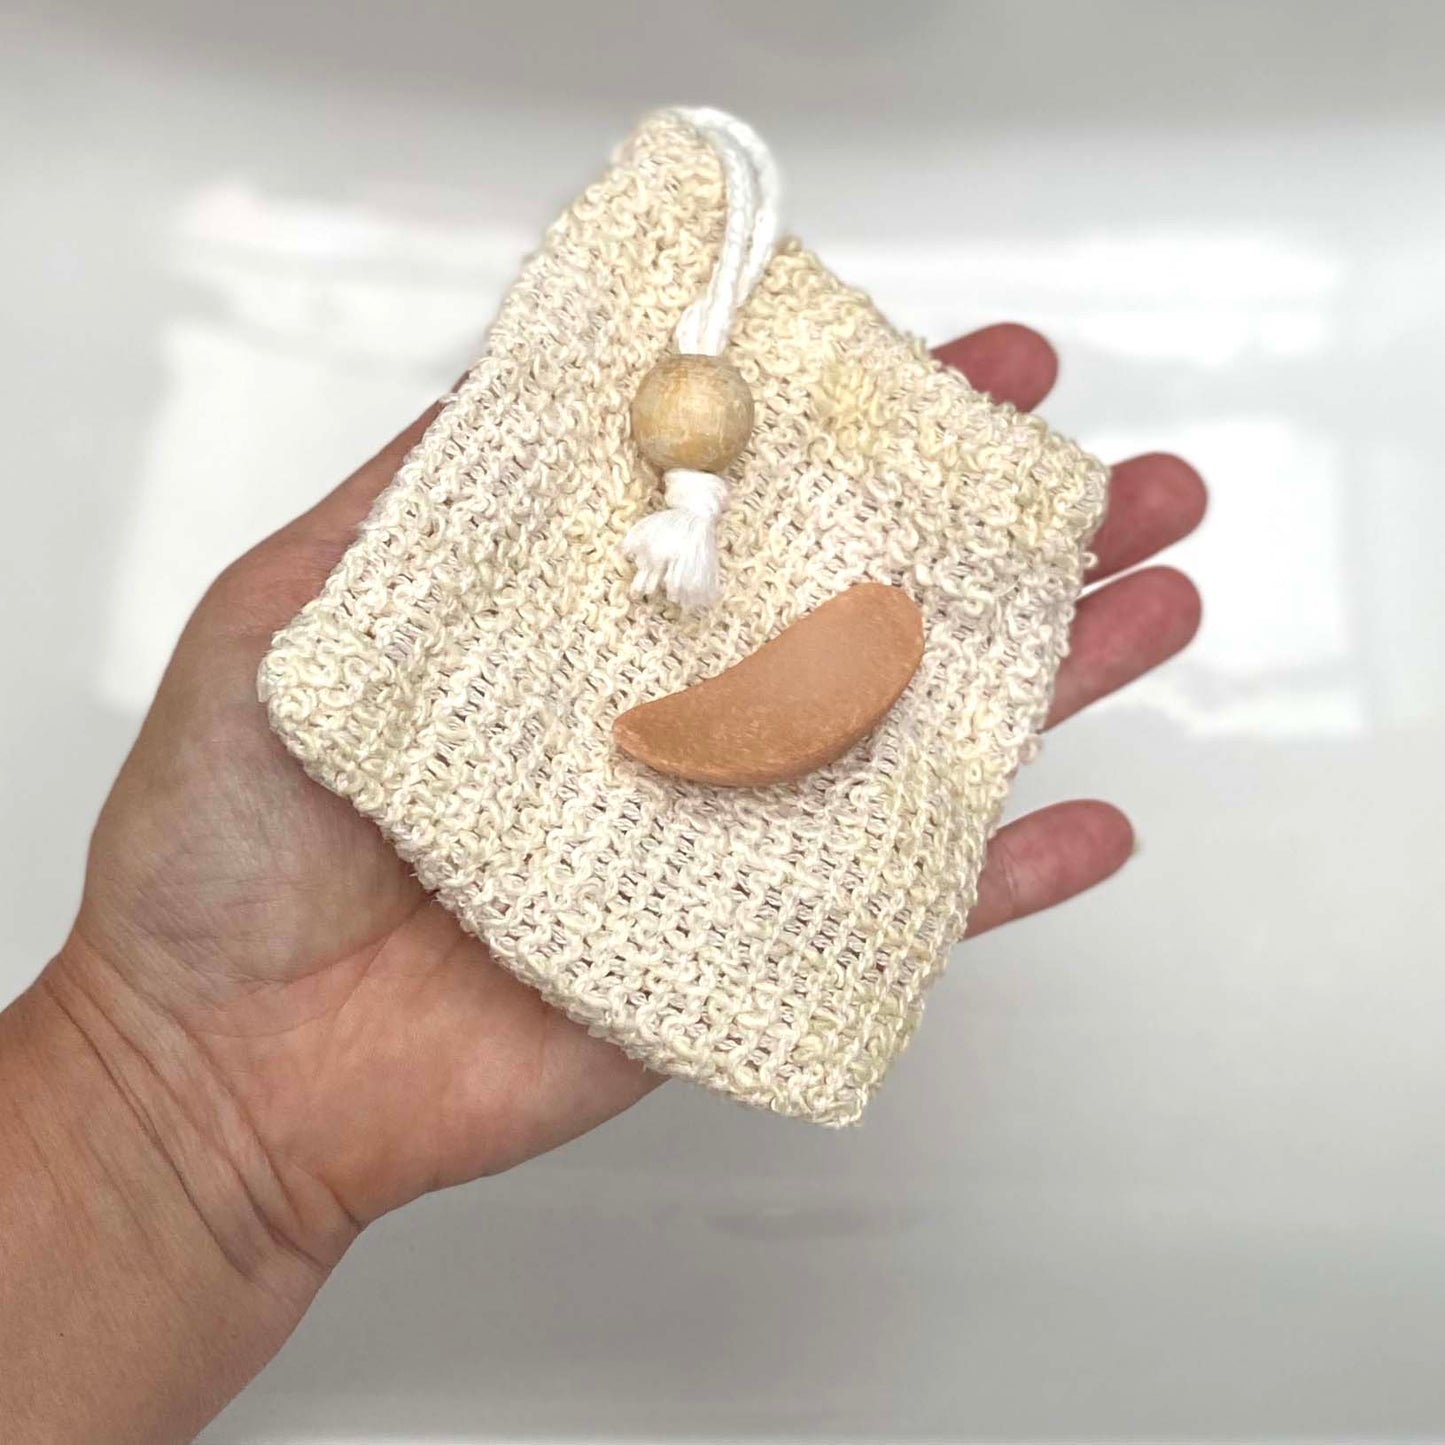 A small piece of pink soap placed on top of the natural fibre soap pouch being held by a hand against a white background